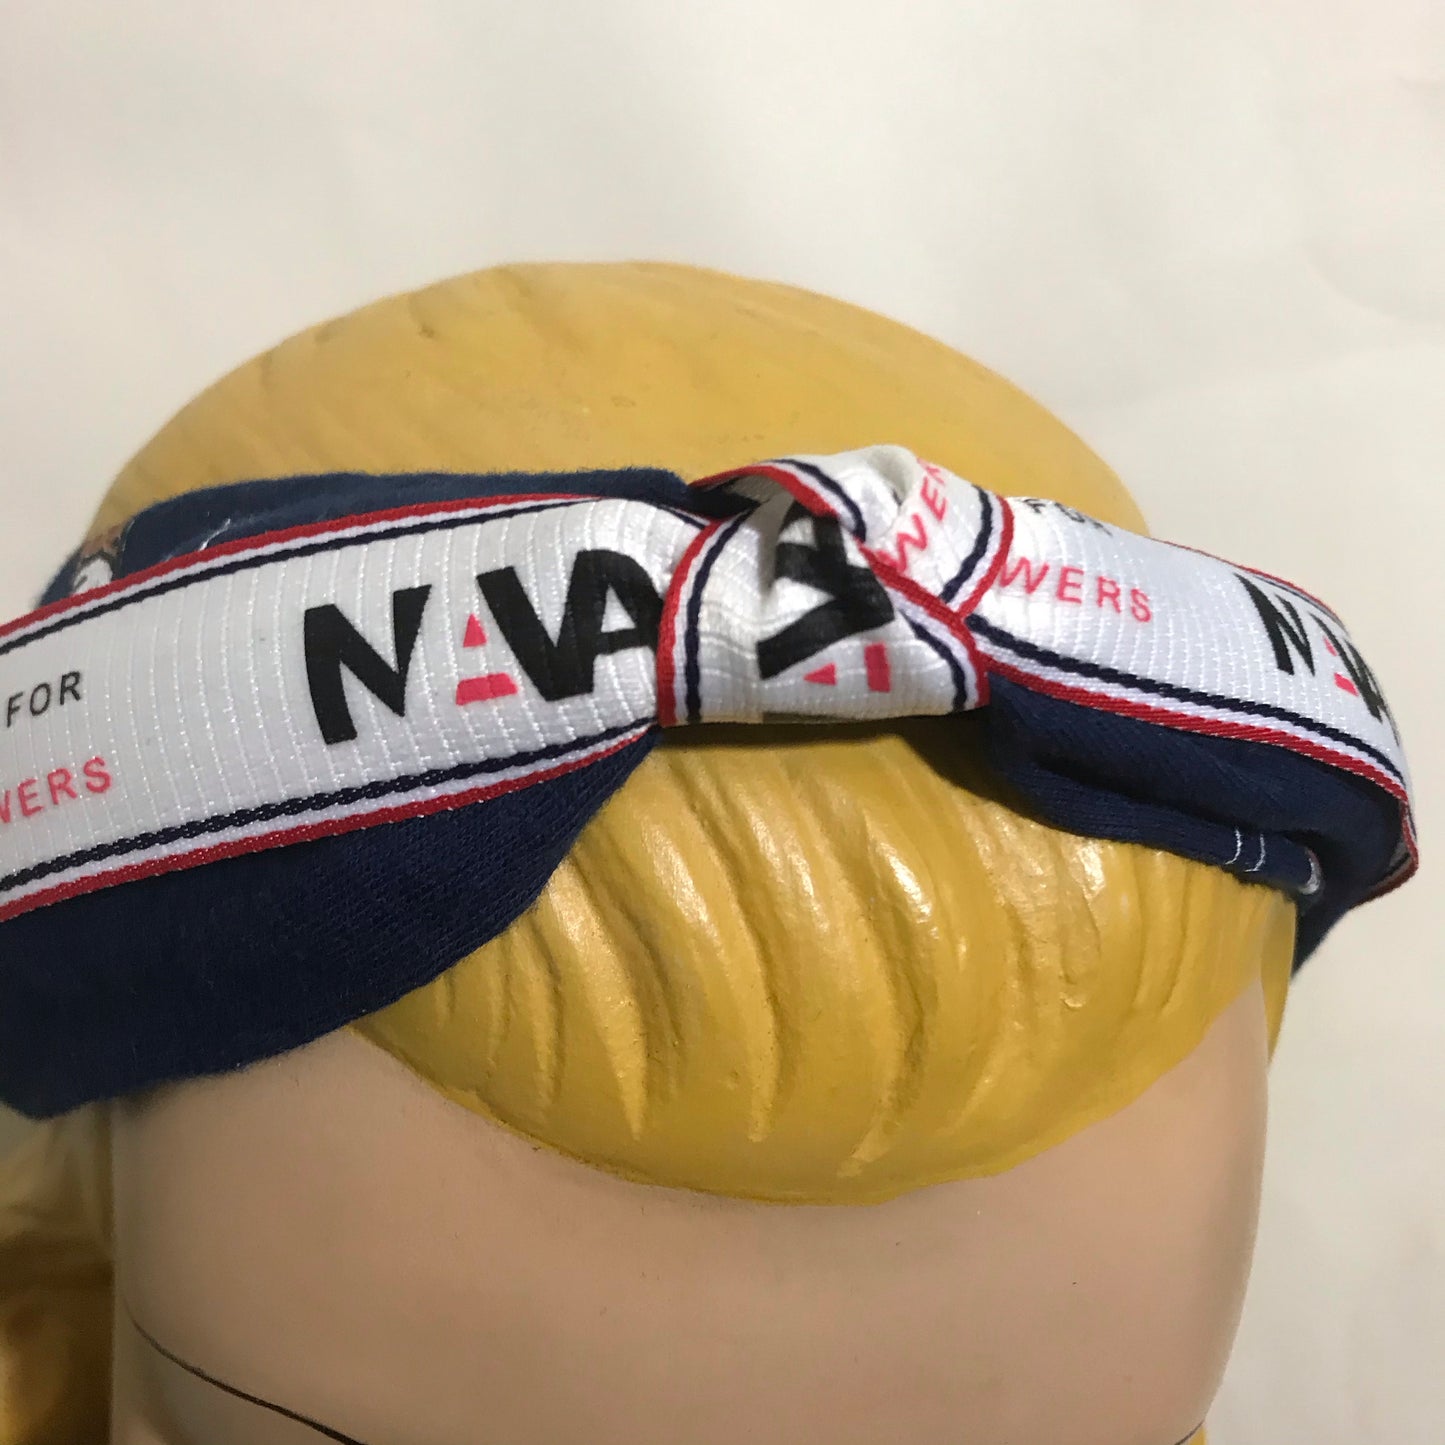 Cigarette Novelty Print! Travel Collection Blue, Red and White Vintage Airline Style Ribbon Turban Headband